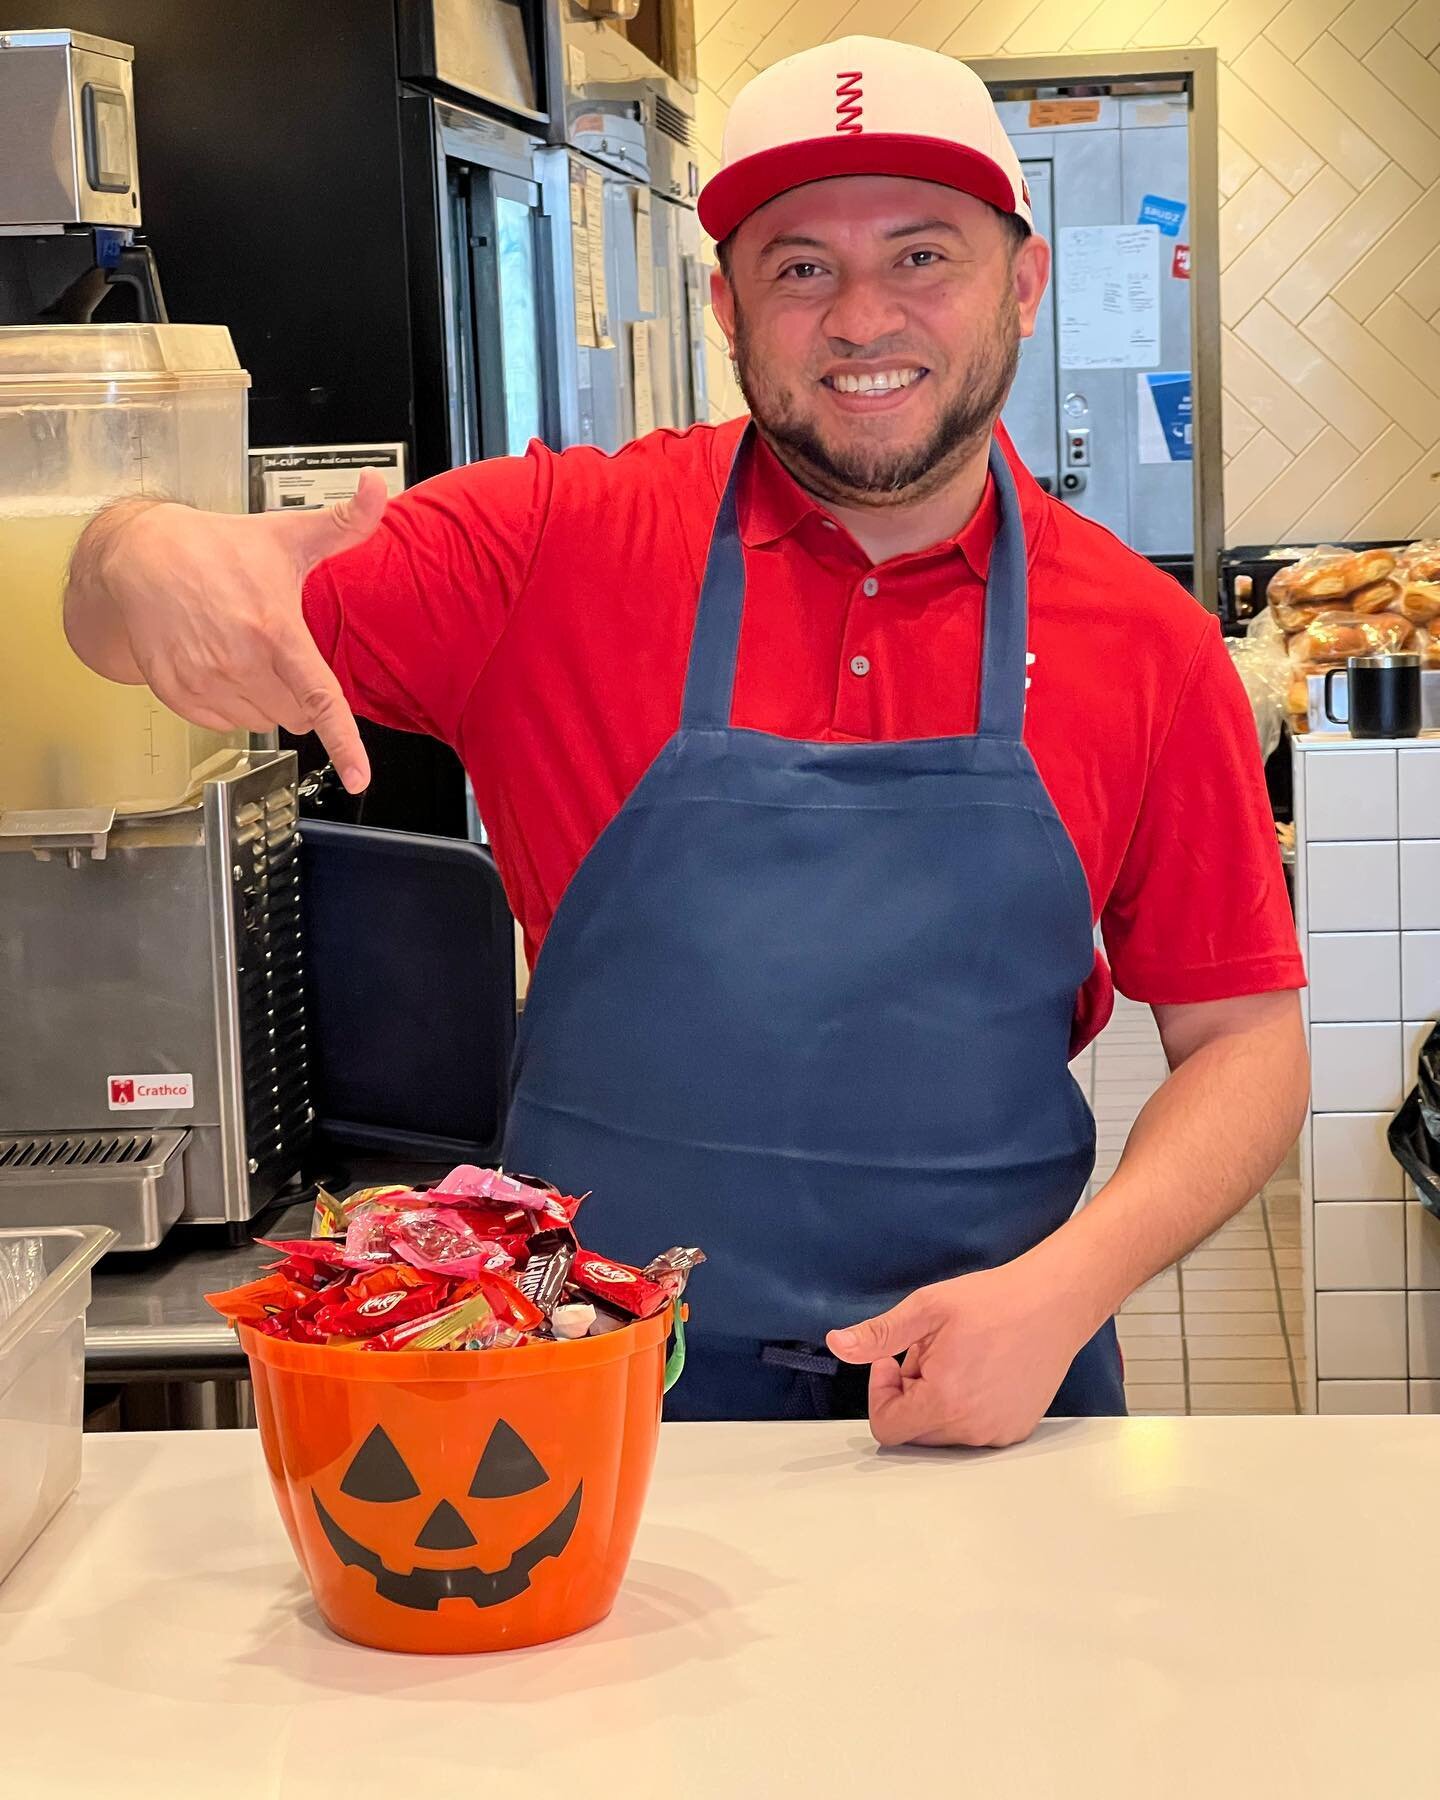 👻 HAPPY HALLOWEEN! 🎃

We&rsquo;re getting into the holiday spirit and are hosting a COSTUME CONTEST! 

We&rsquo;ve got $25 gift cards for:

👻 Best Kids Costume
🎃 Best Overall Costume
🍟 Best French Fry Costume
(yes, you read that last one right)
